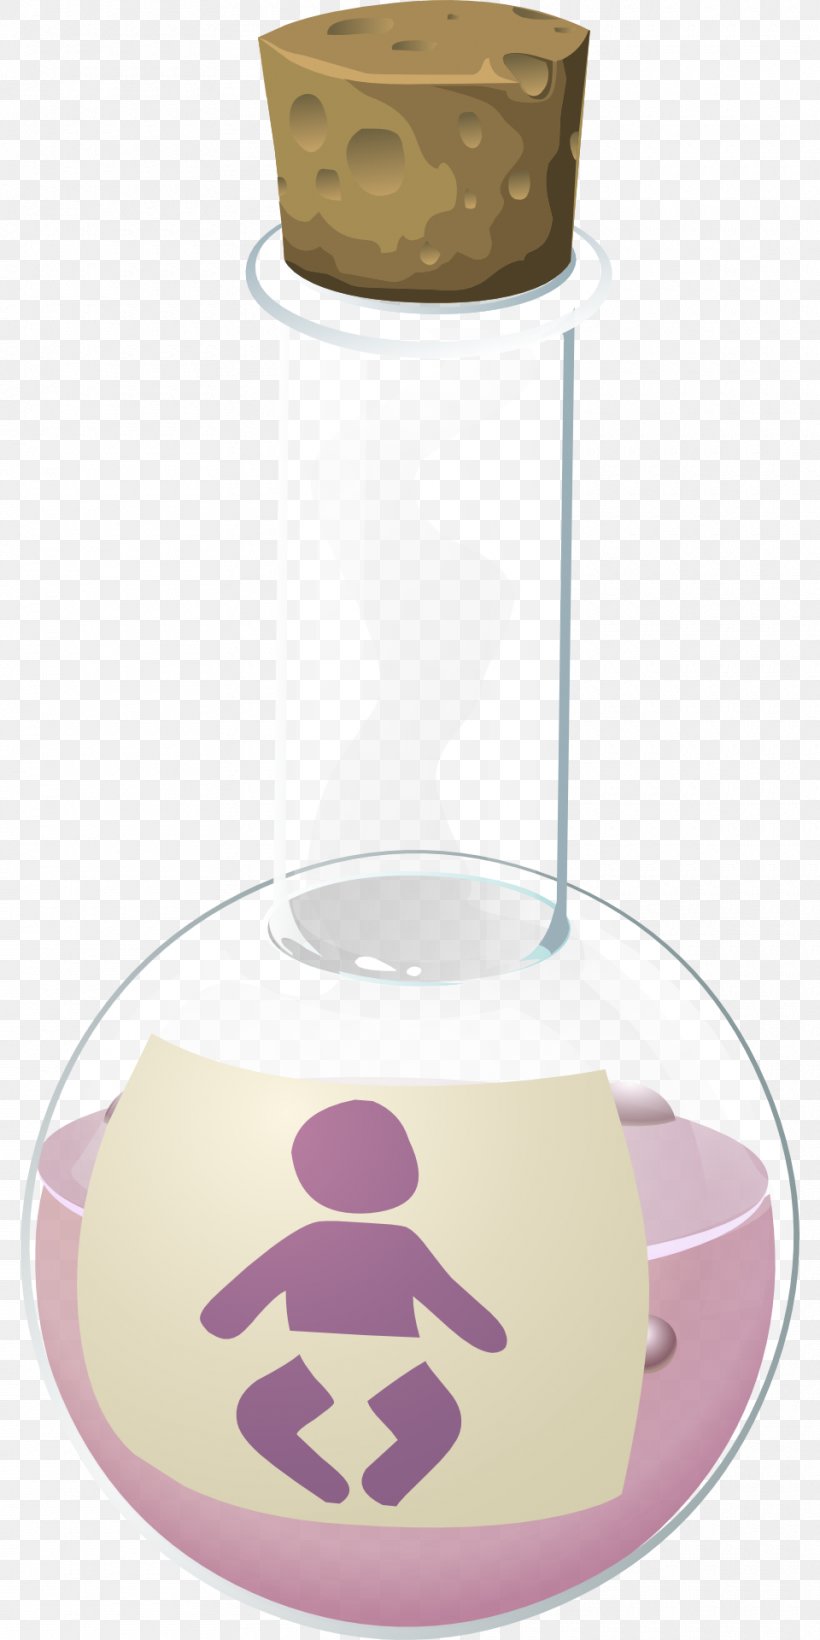 Potion Clip Art, PNG, 960x1920px, Potion, Animation, Drinkware, Image File Formats, Laboratory Flasks Download Free